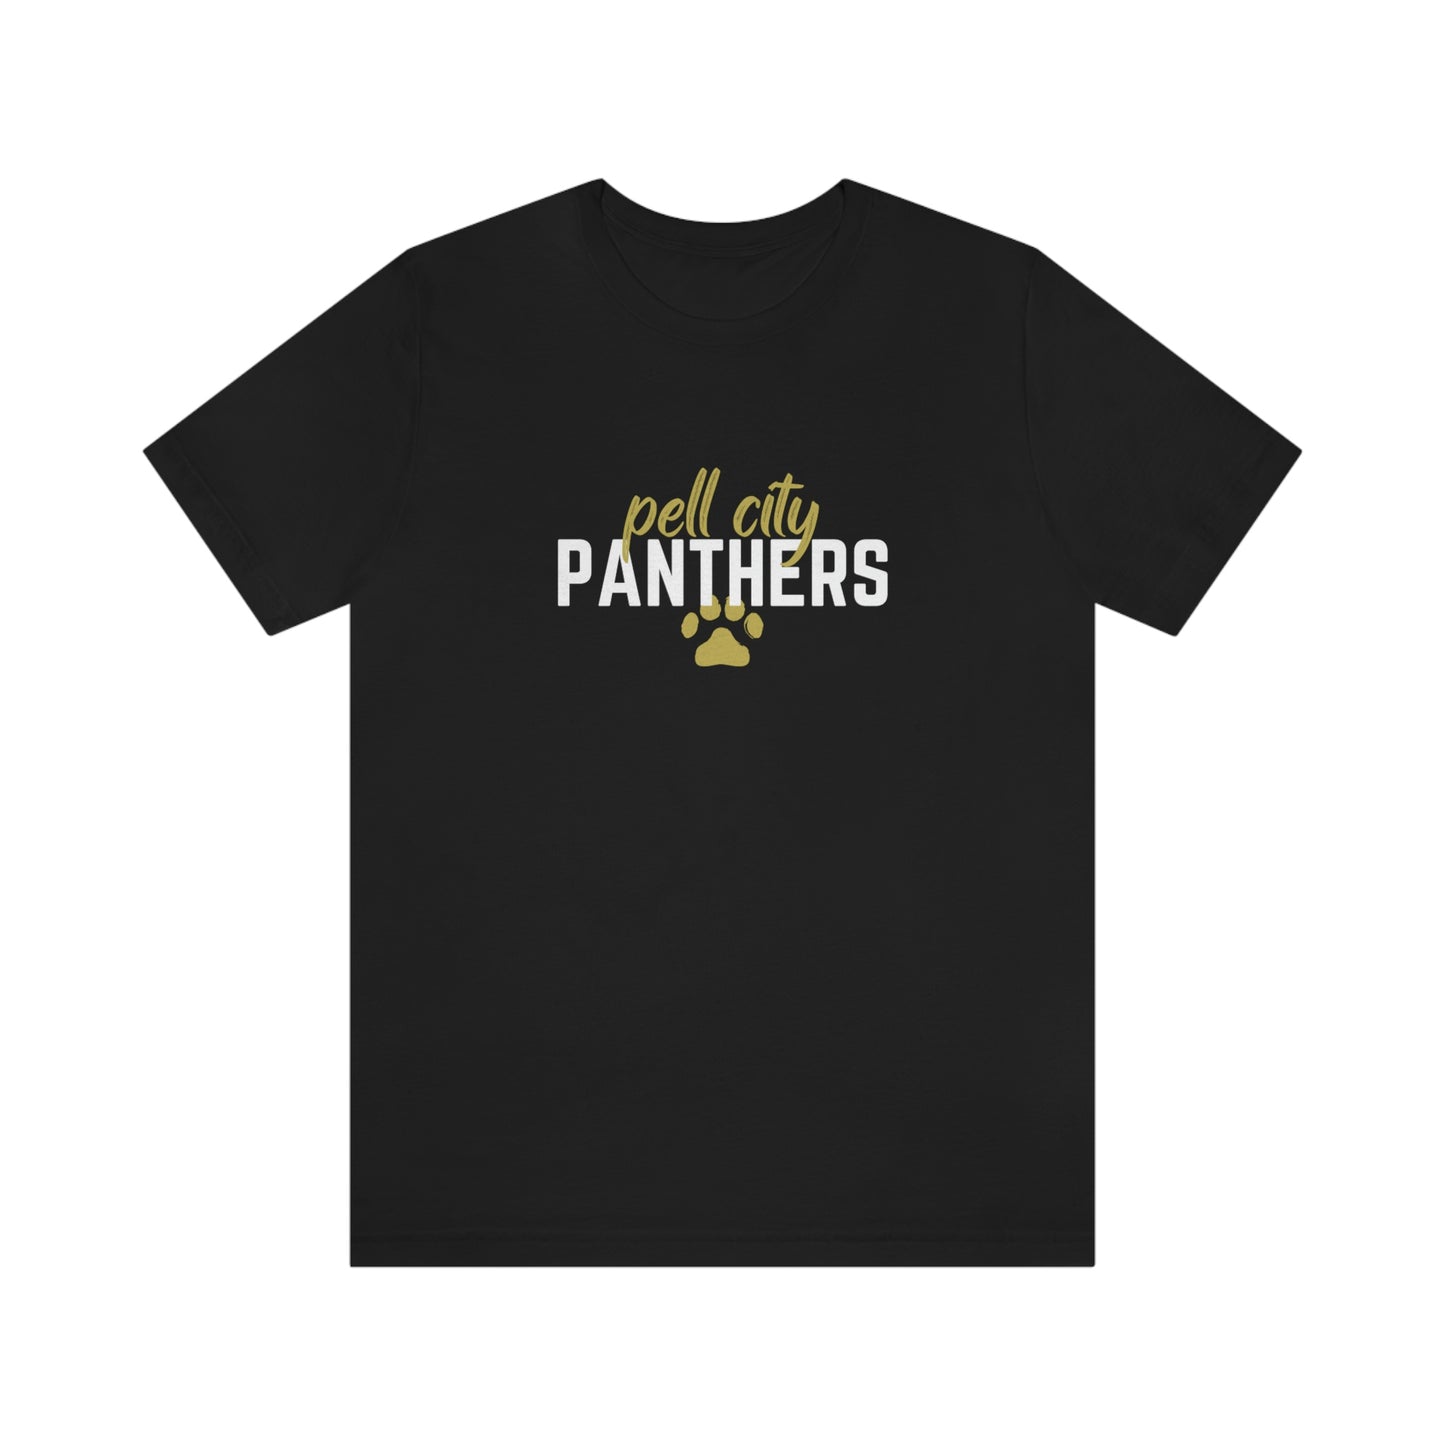 Pell City Panthers (Black)